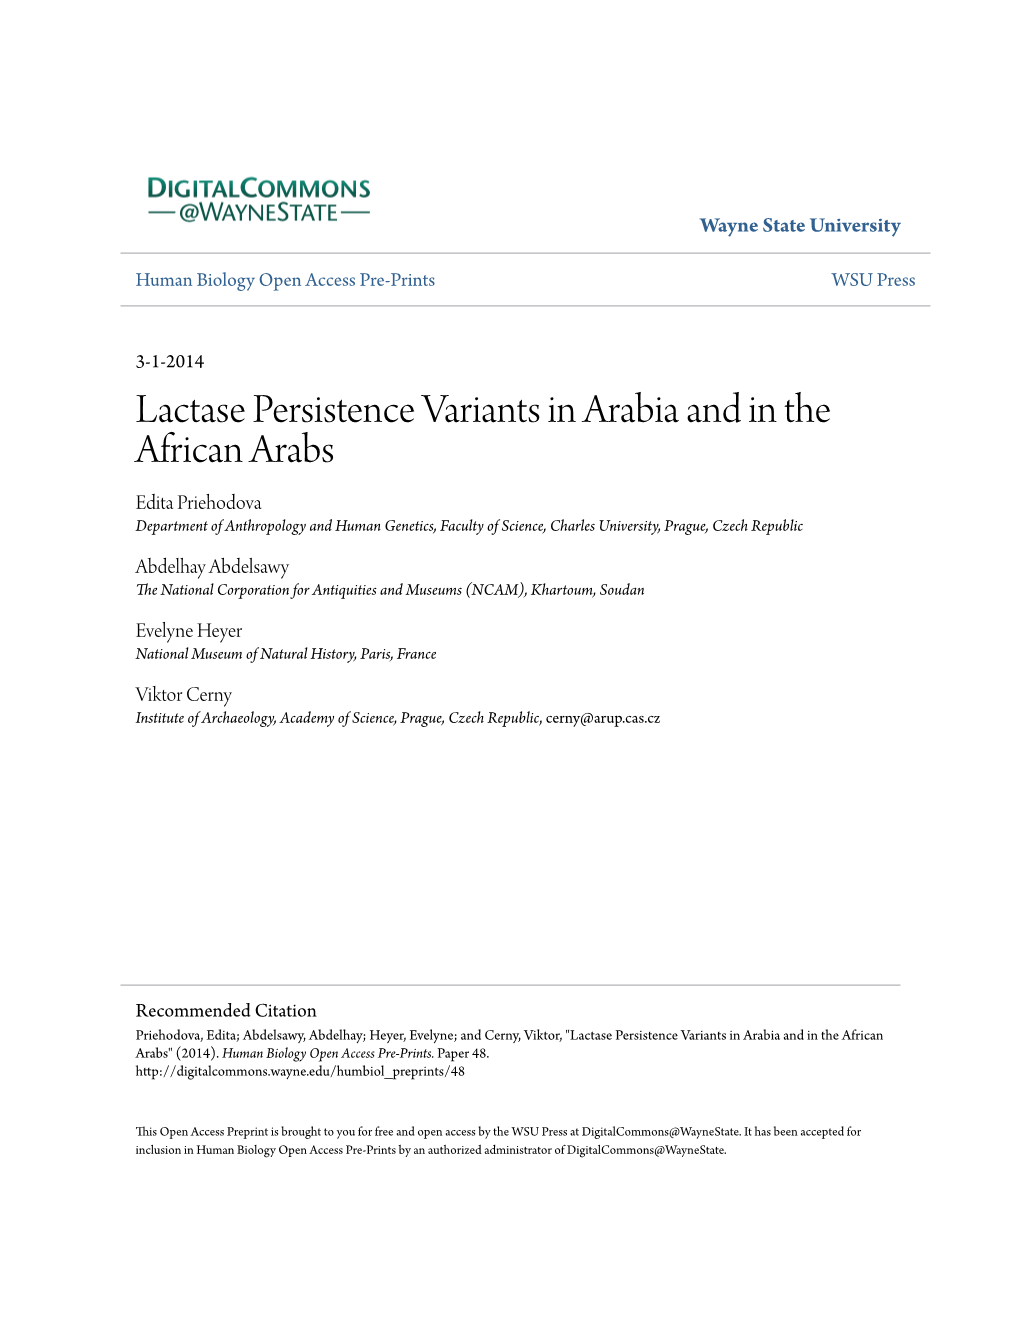 Lactase Persistence Variants in Arabia and in the African Arabs